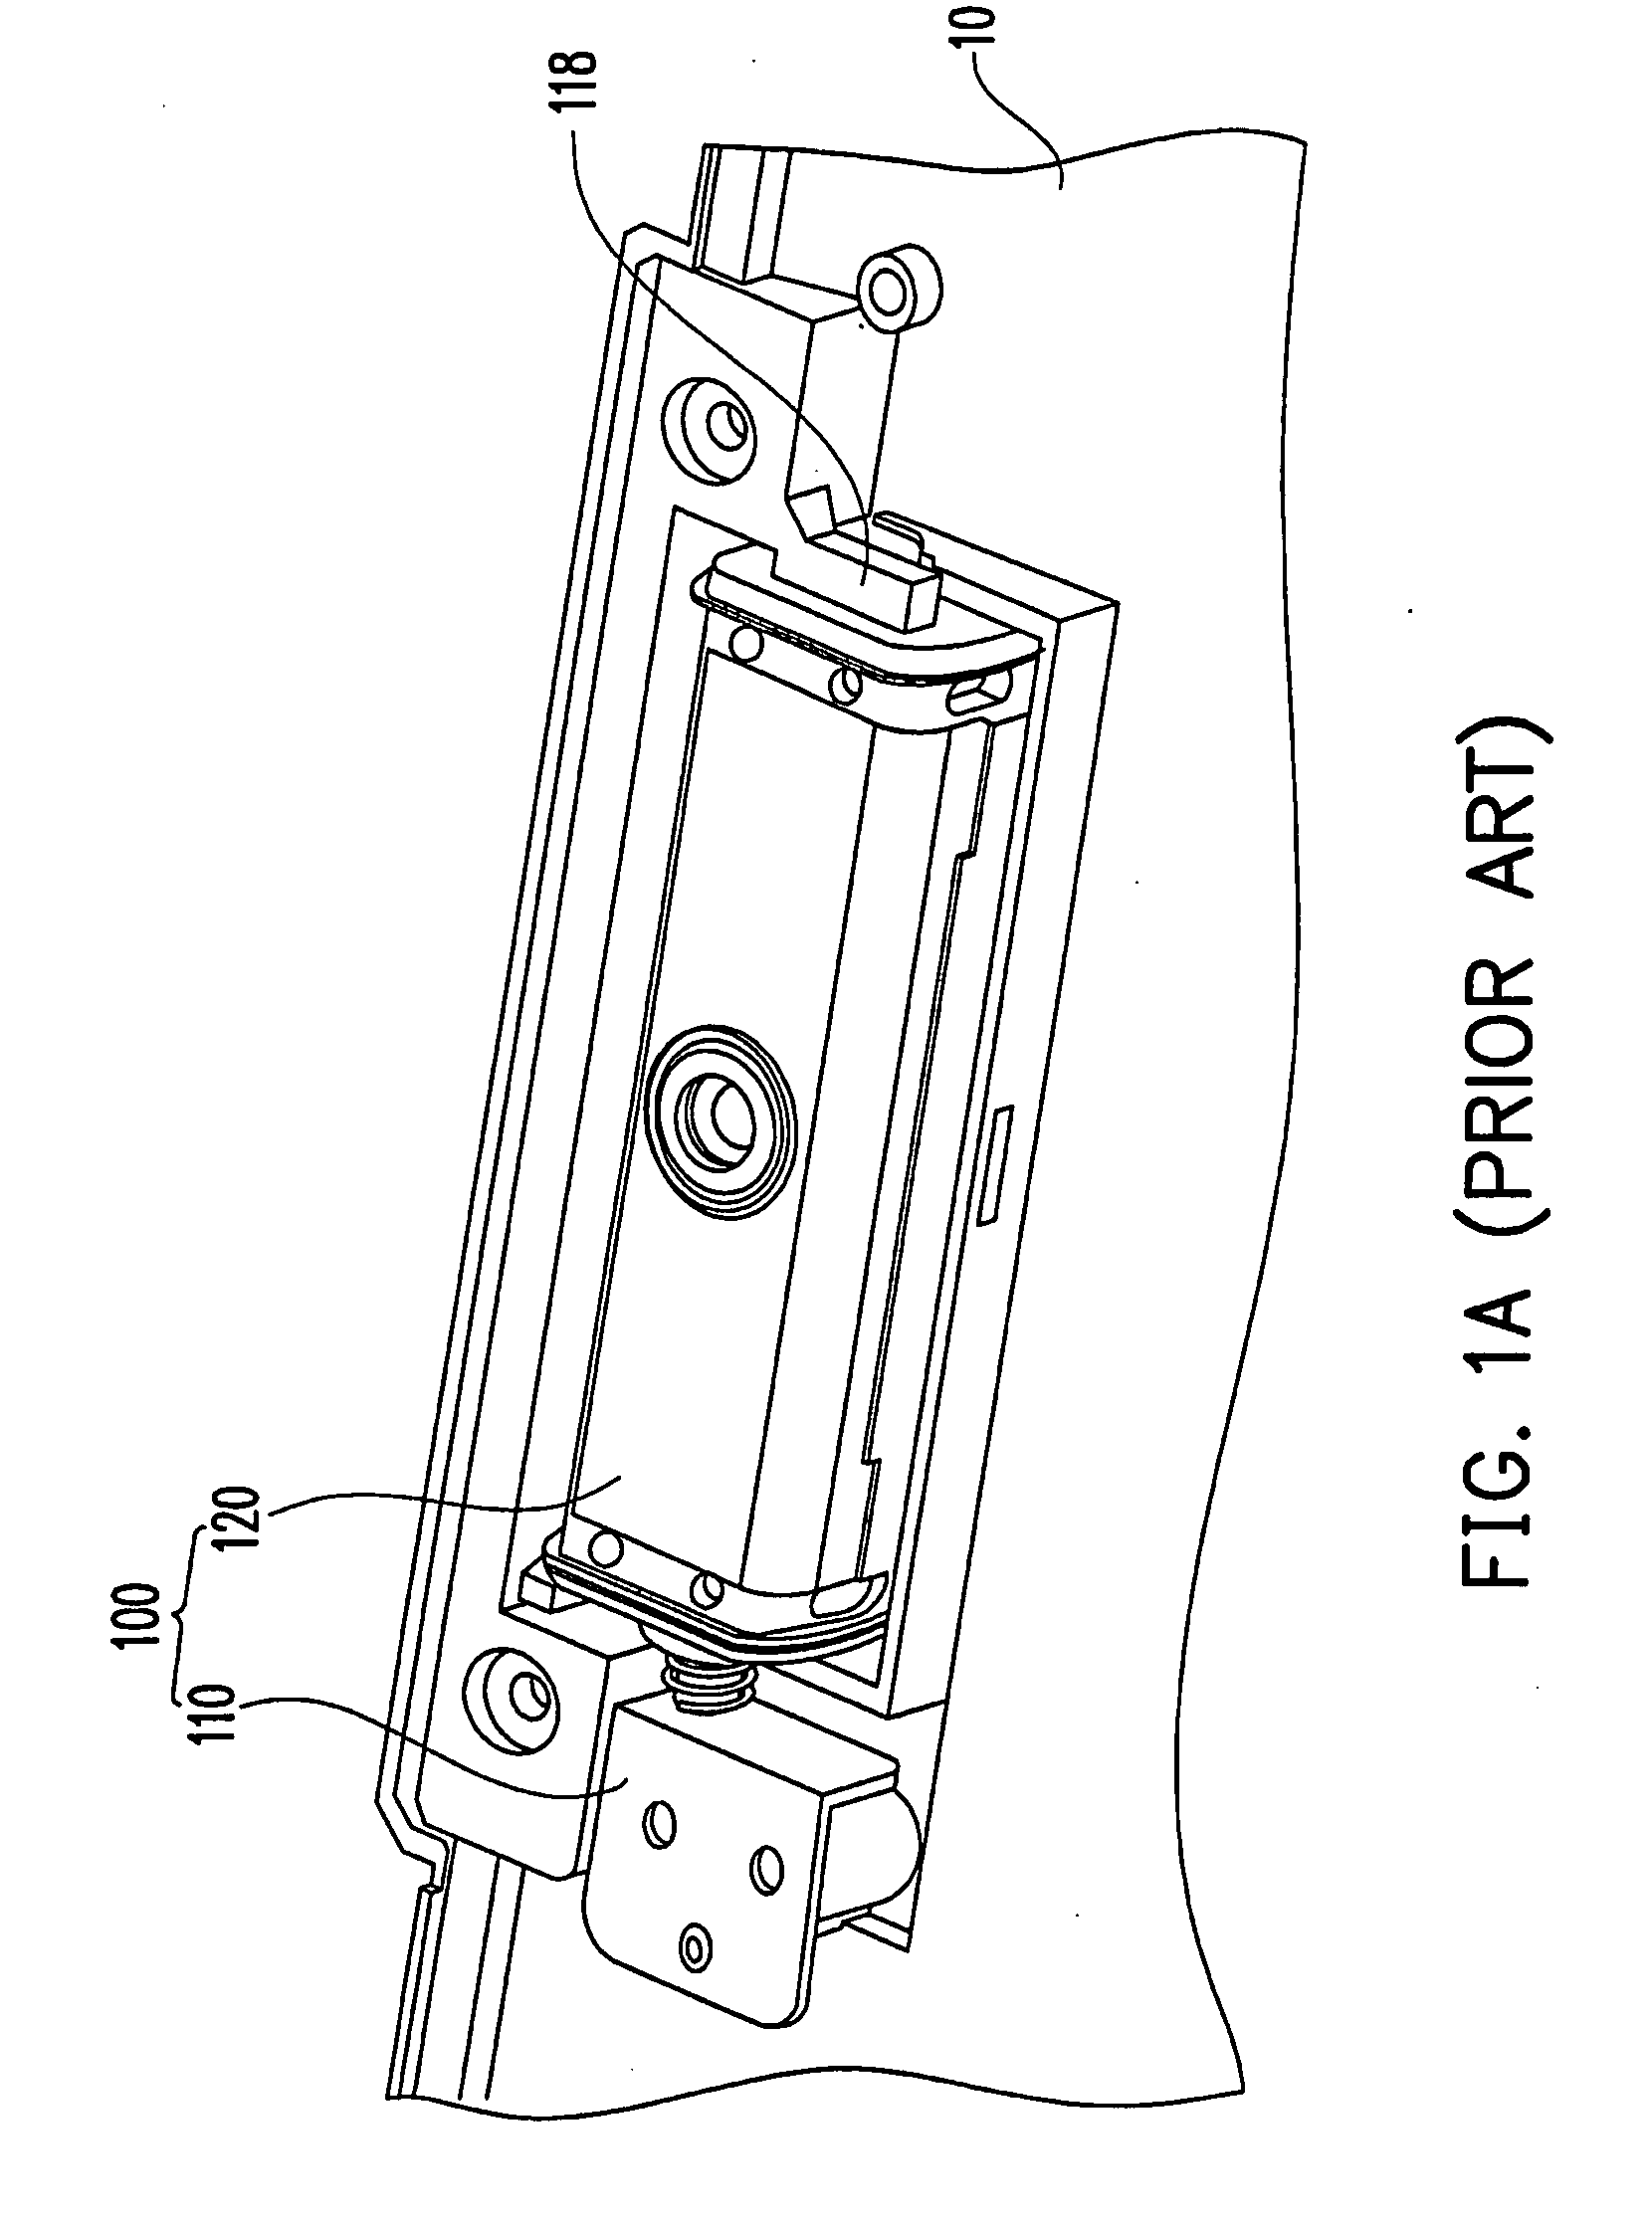 Image-capturing module and portable computer having the same